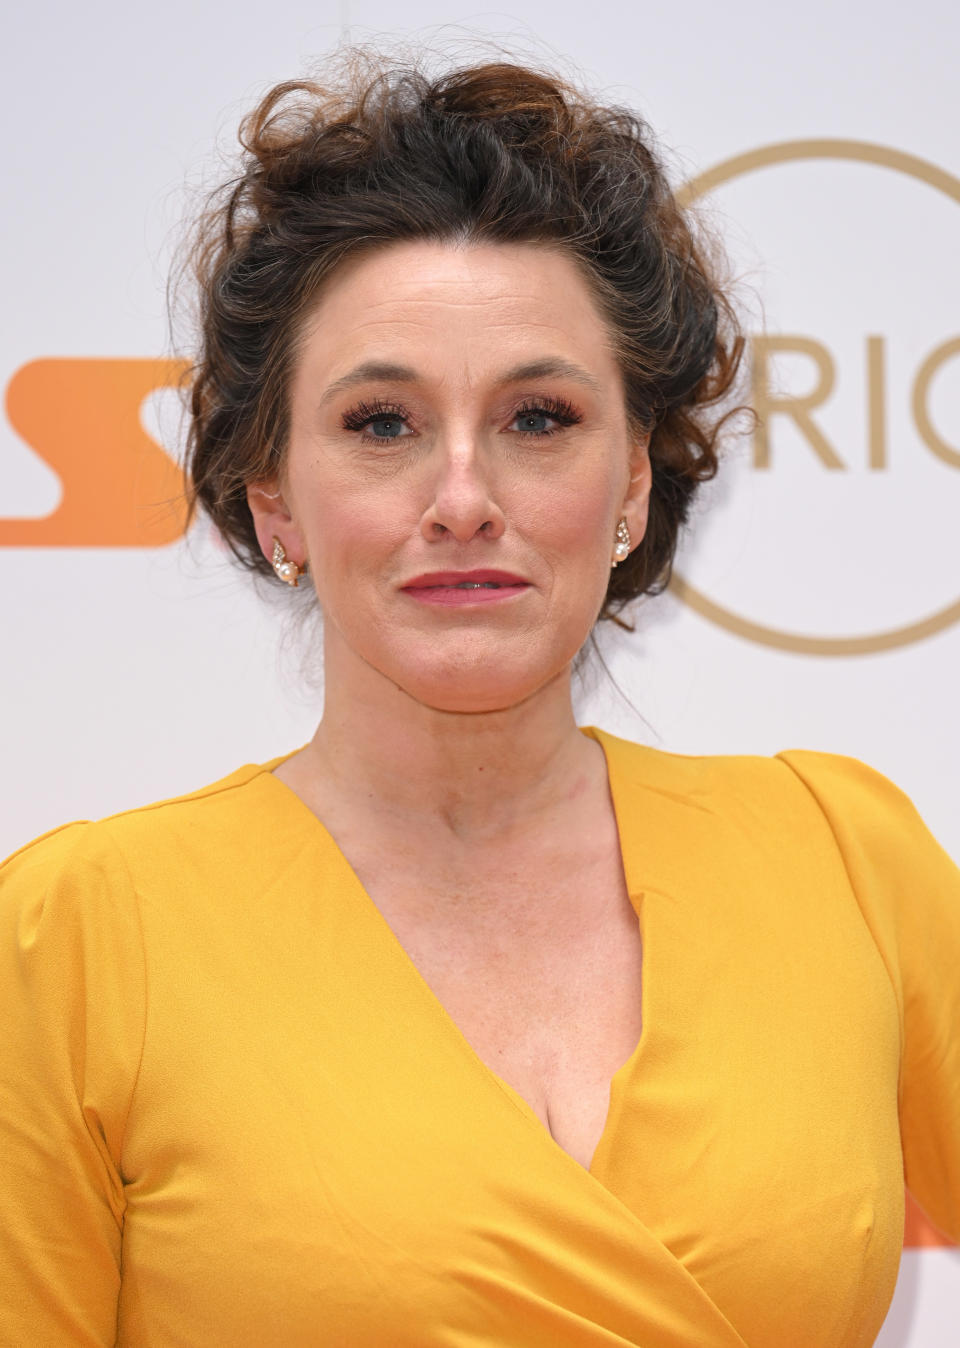 LONDON, ENGLAND - SEPTEMBER 15: Grace Dent attends The TRIC Awards 2021 at 8 Northumberland Avenue on September 15, 2021 in London, England. (Photo by Karwai Tang/WireImage)